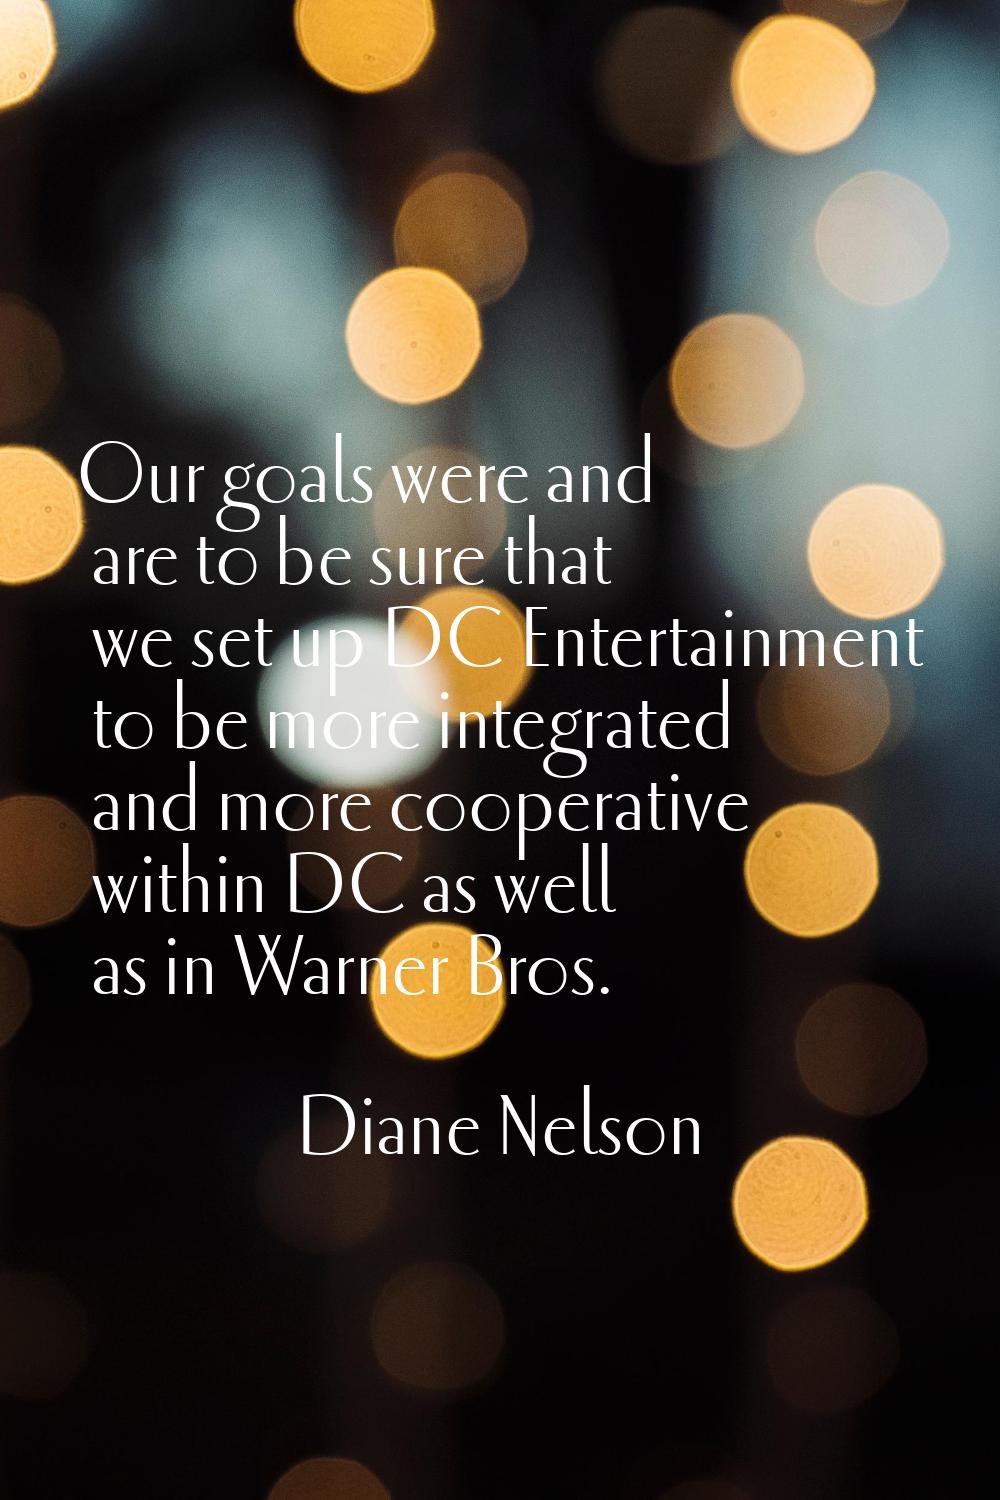 Our goals were and are to be sure that we set up DC Entertainment to be more integrated and more co